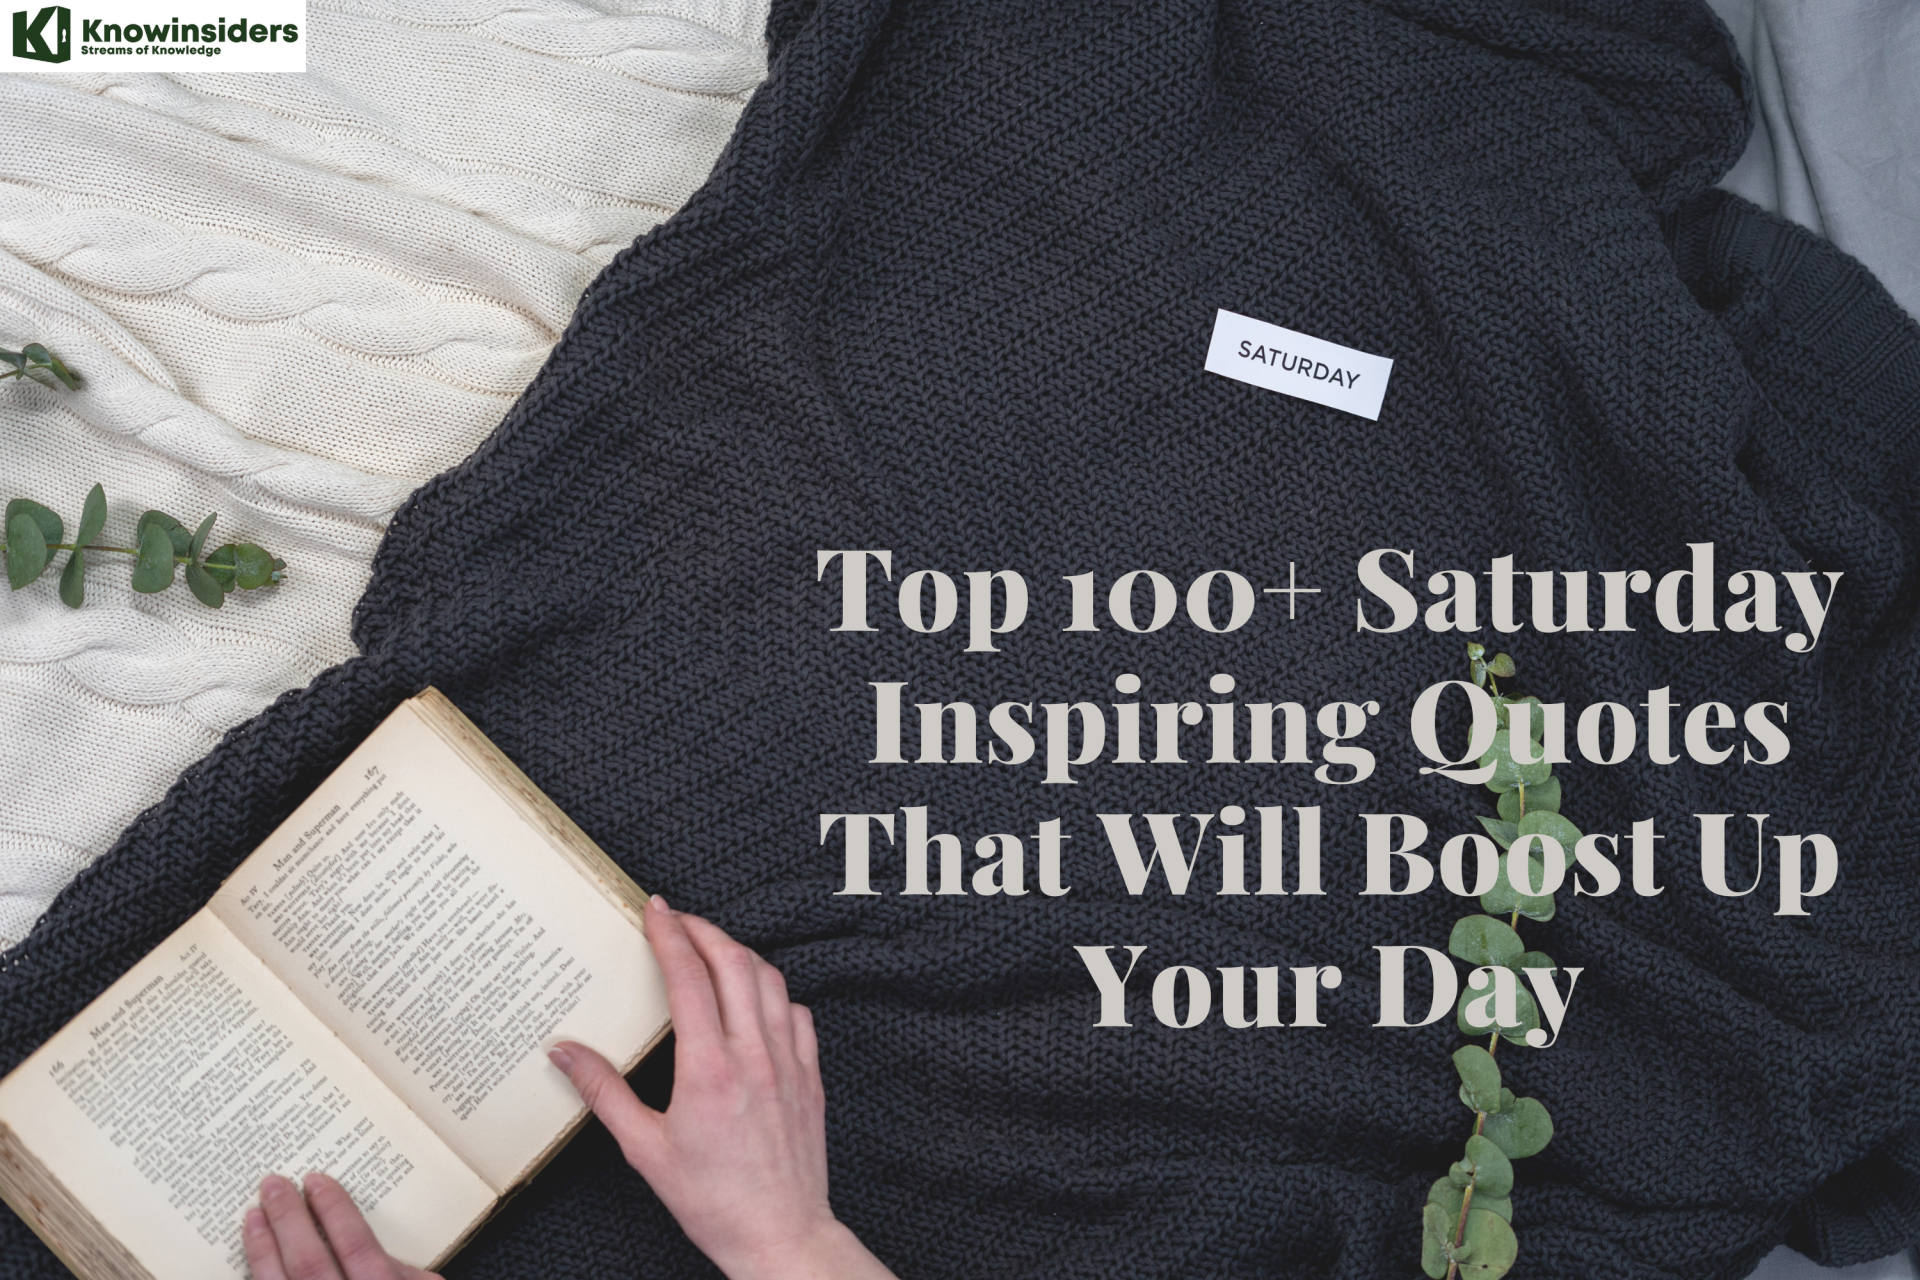 Top 100+ Saturday Inspiring Quotes That Will Boost Up Your Day